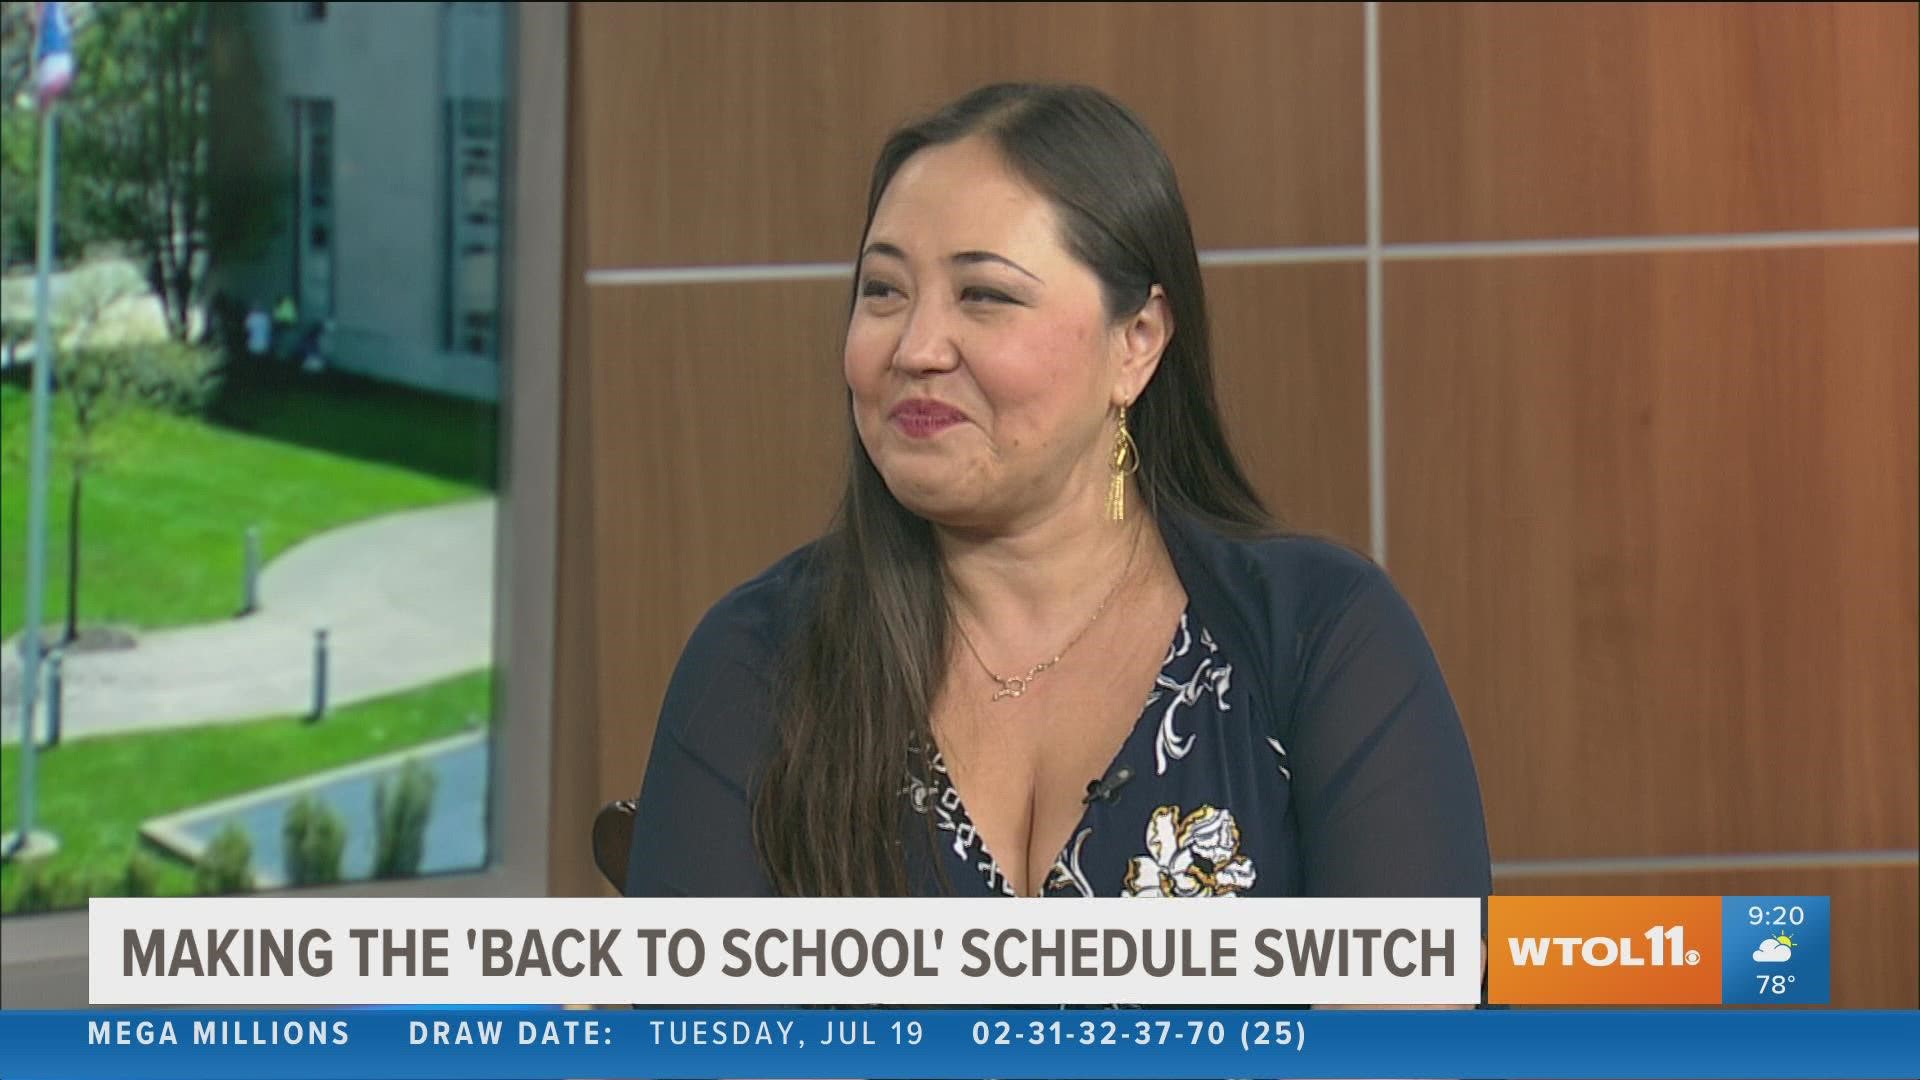 Psychiatrist Victoria Kelly says children need routines such as 10 to 12 hours of sleep and structured activities, to succeed in school.